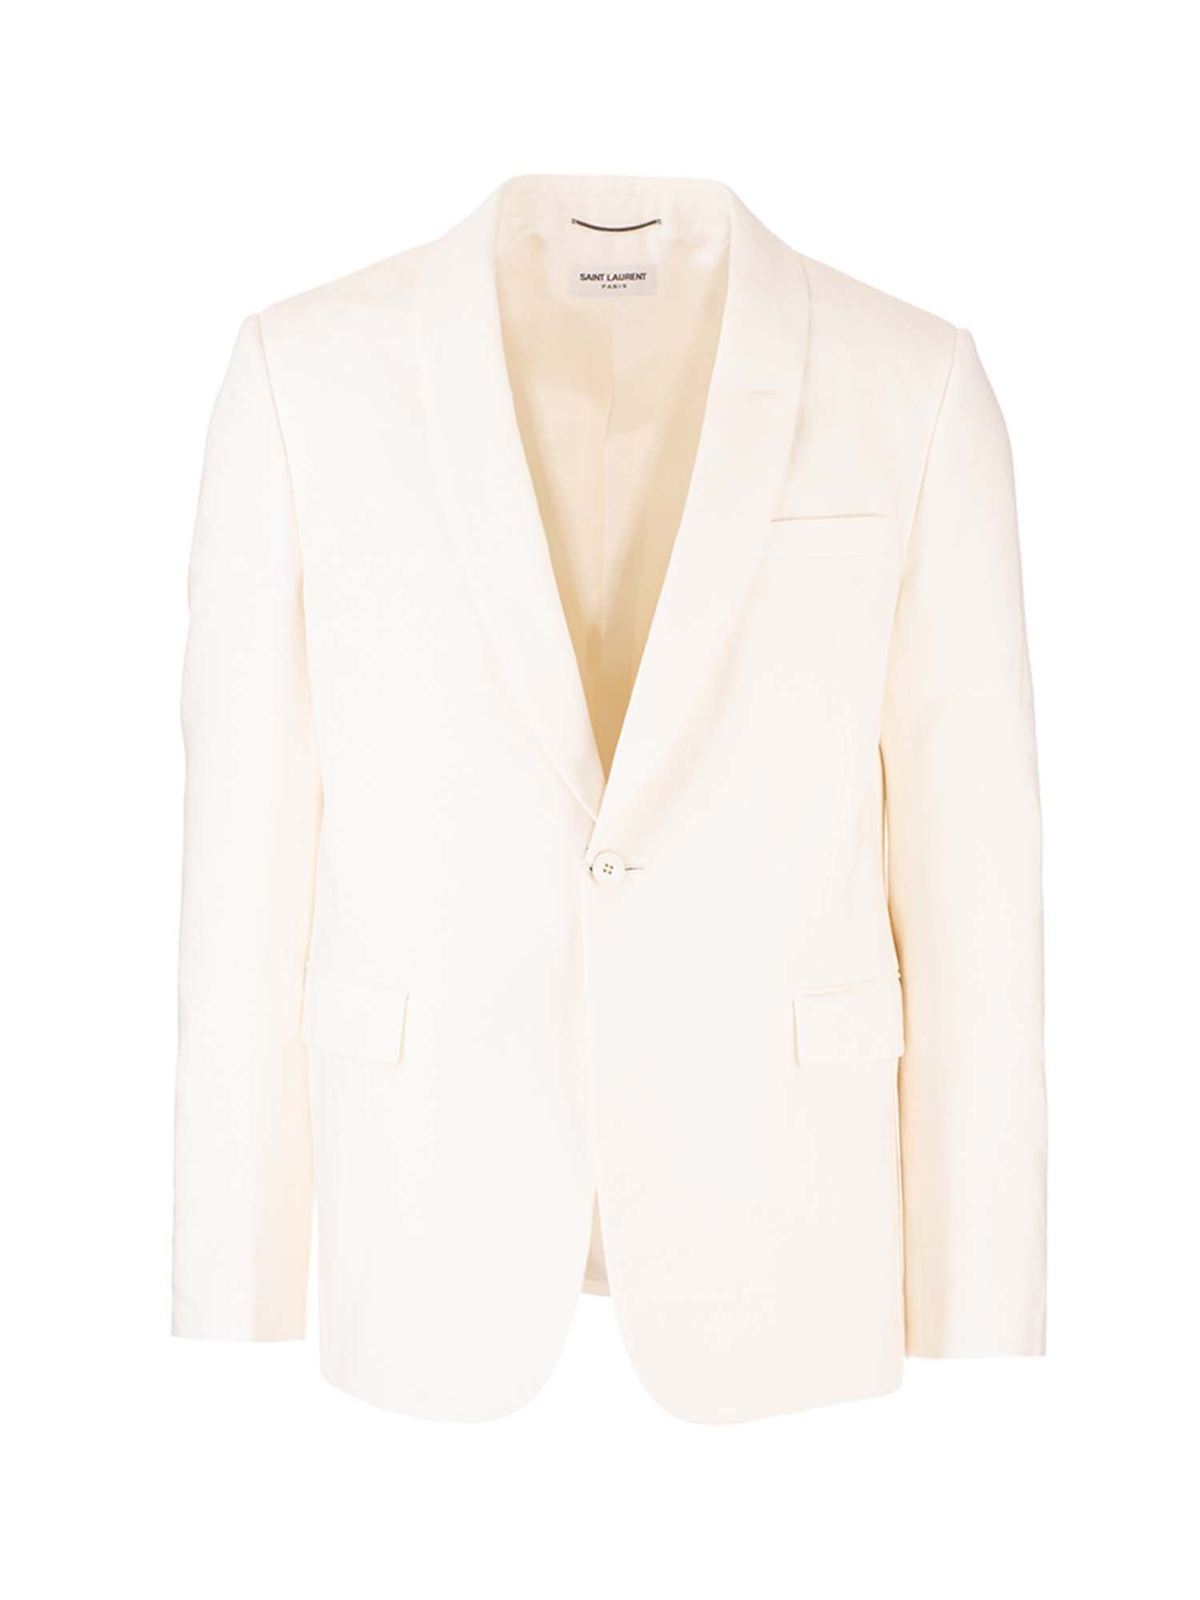 SAINT LAURENT ONE BUTTON JACKET IN IVORY COLOR